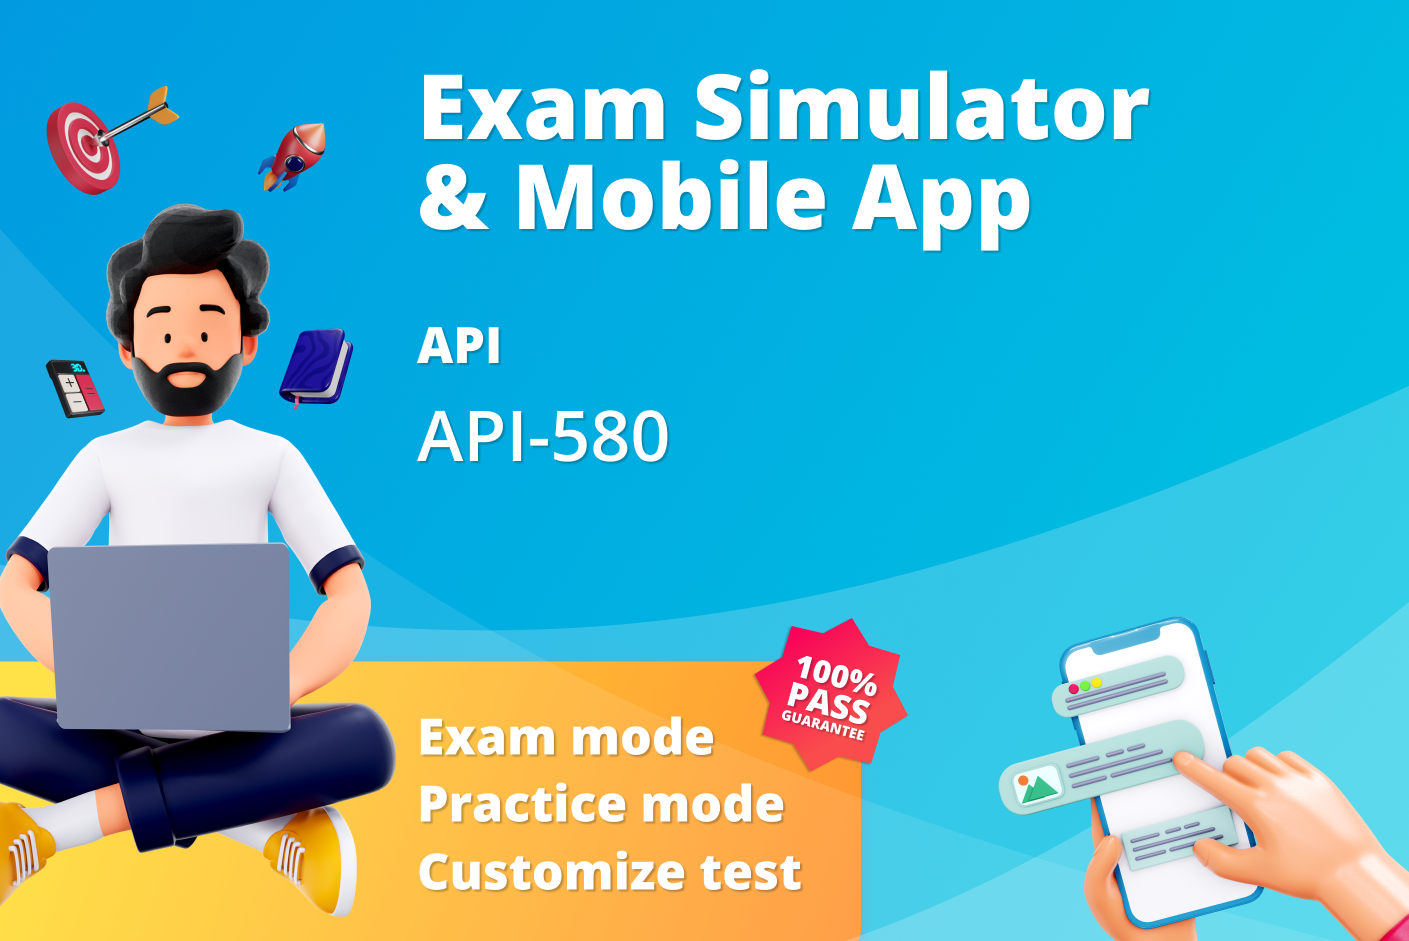 "API-580 Mock exam": Prepare for success with realistic practice tests designed to help you ace the API 580 exam